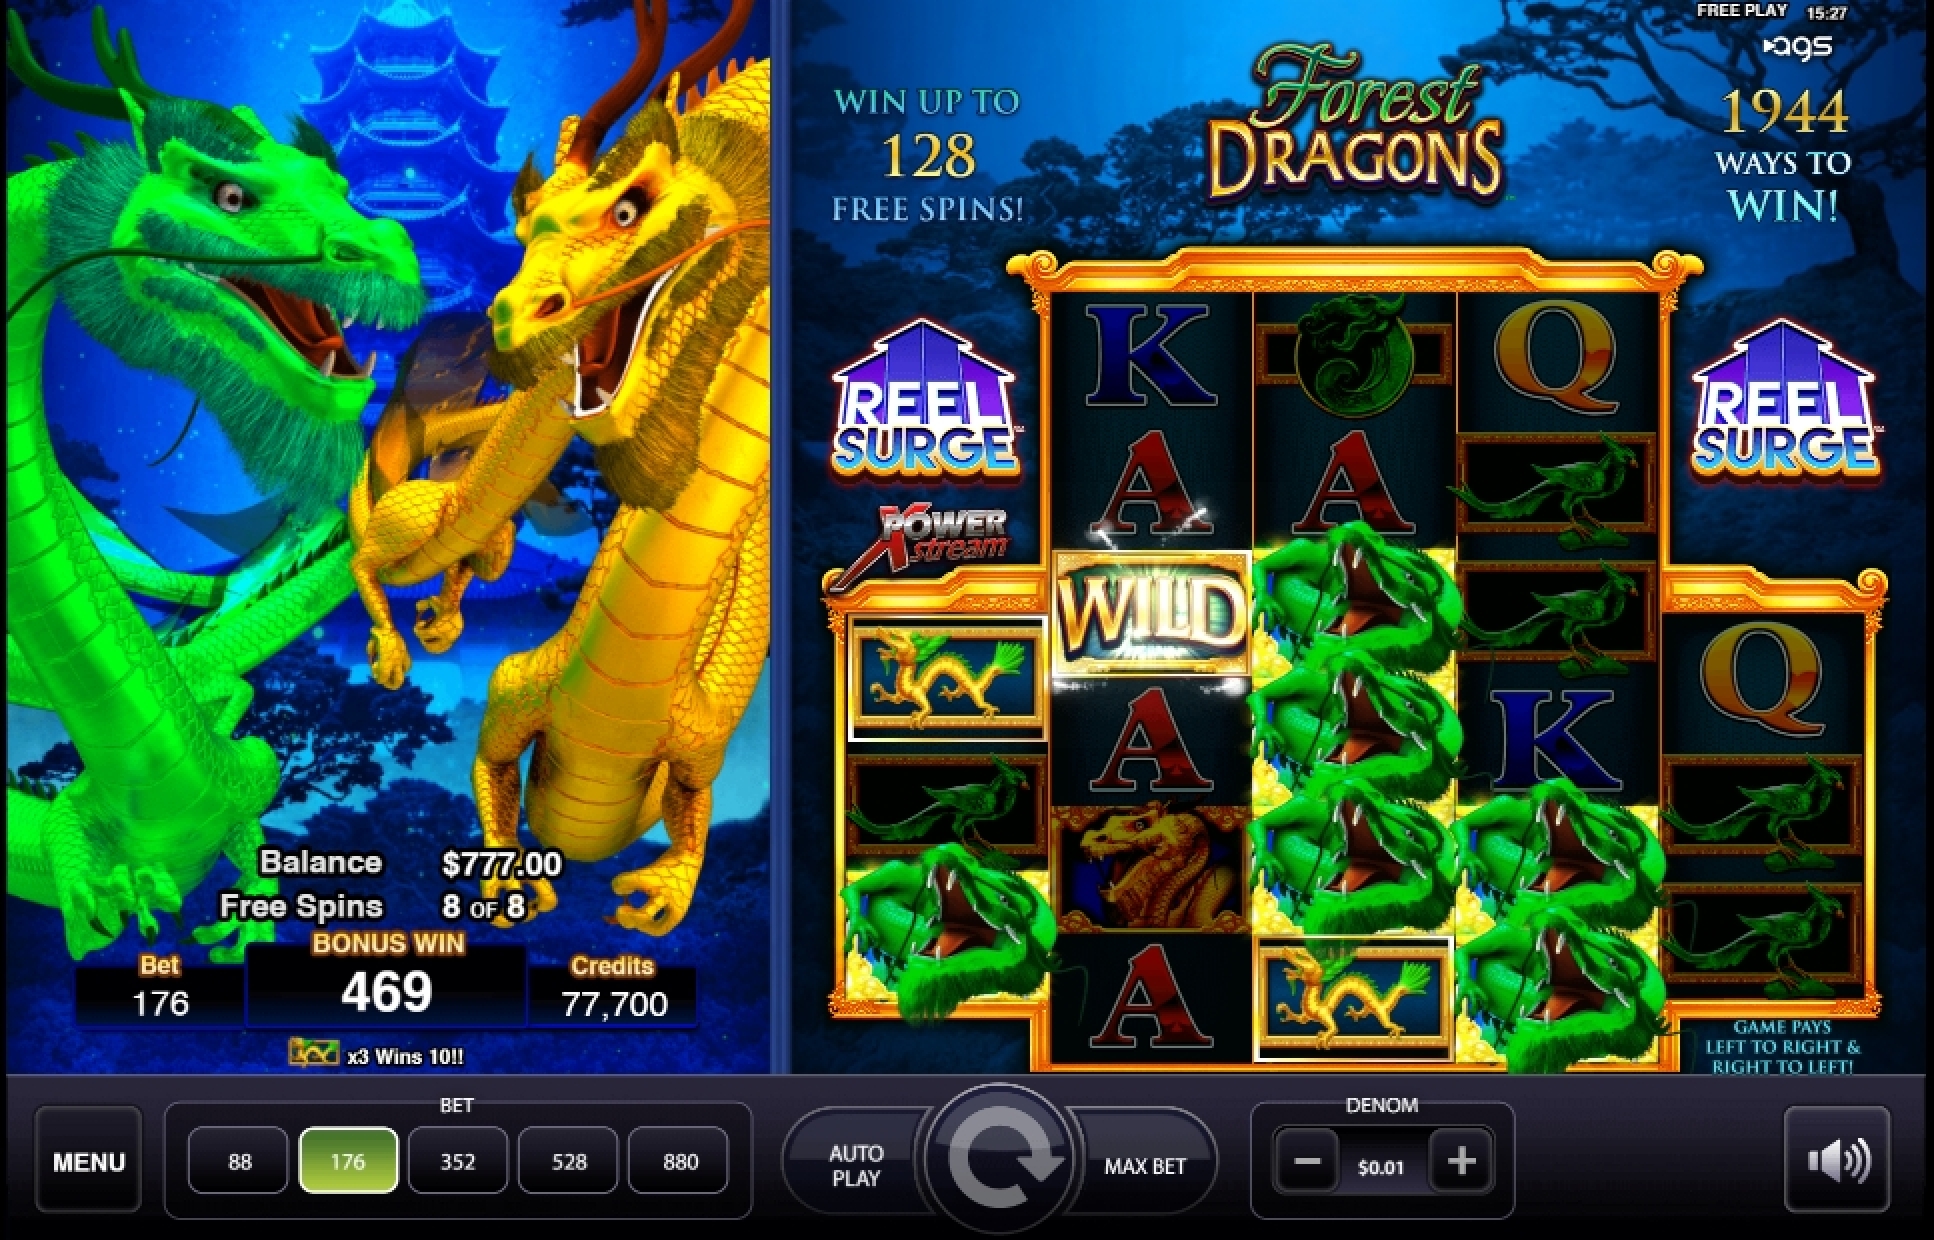 Win Money in Forest Dragons Free Slot Game by AGS